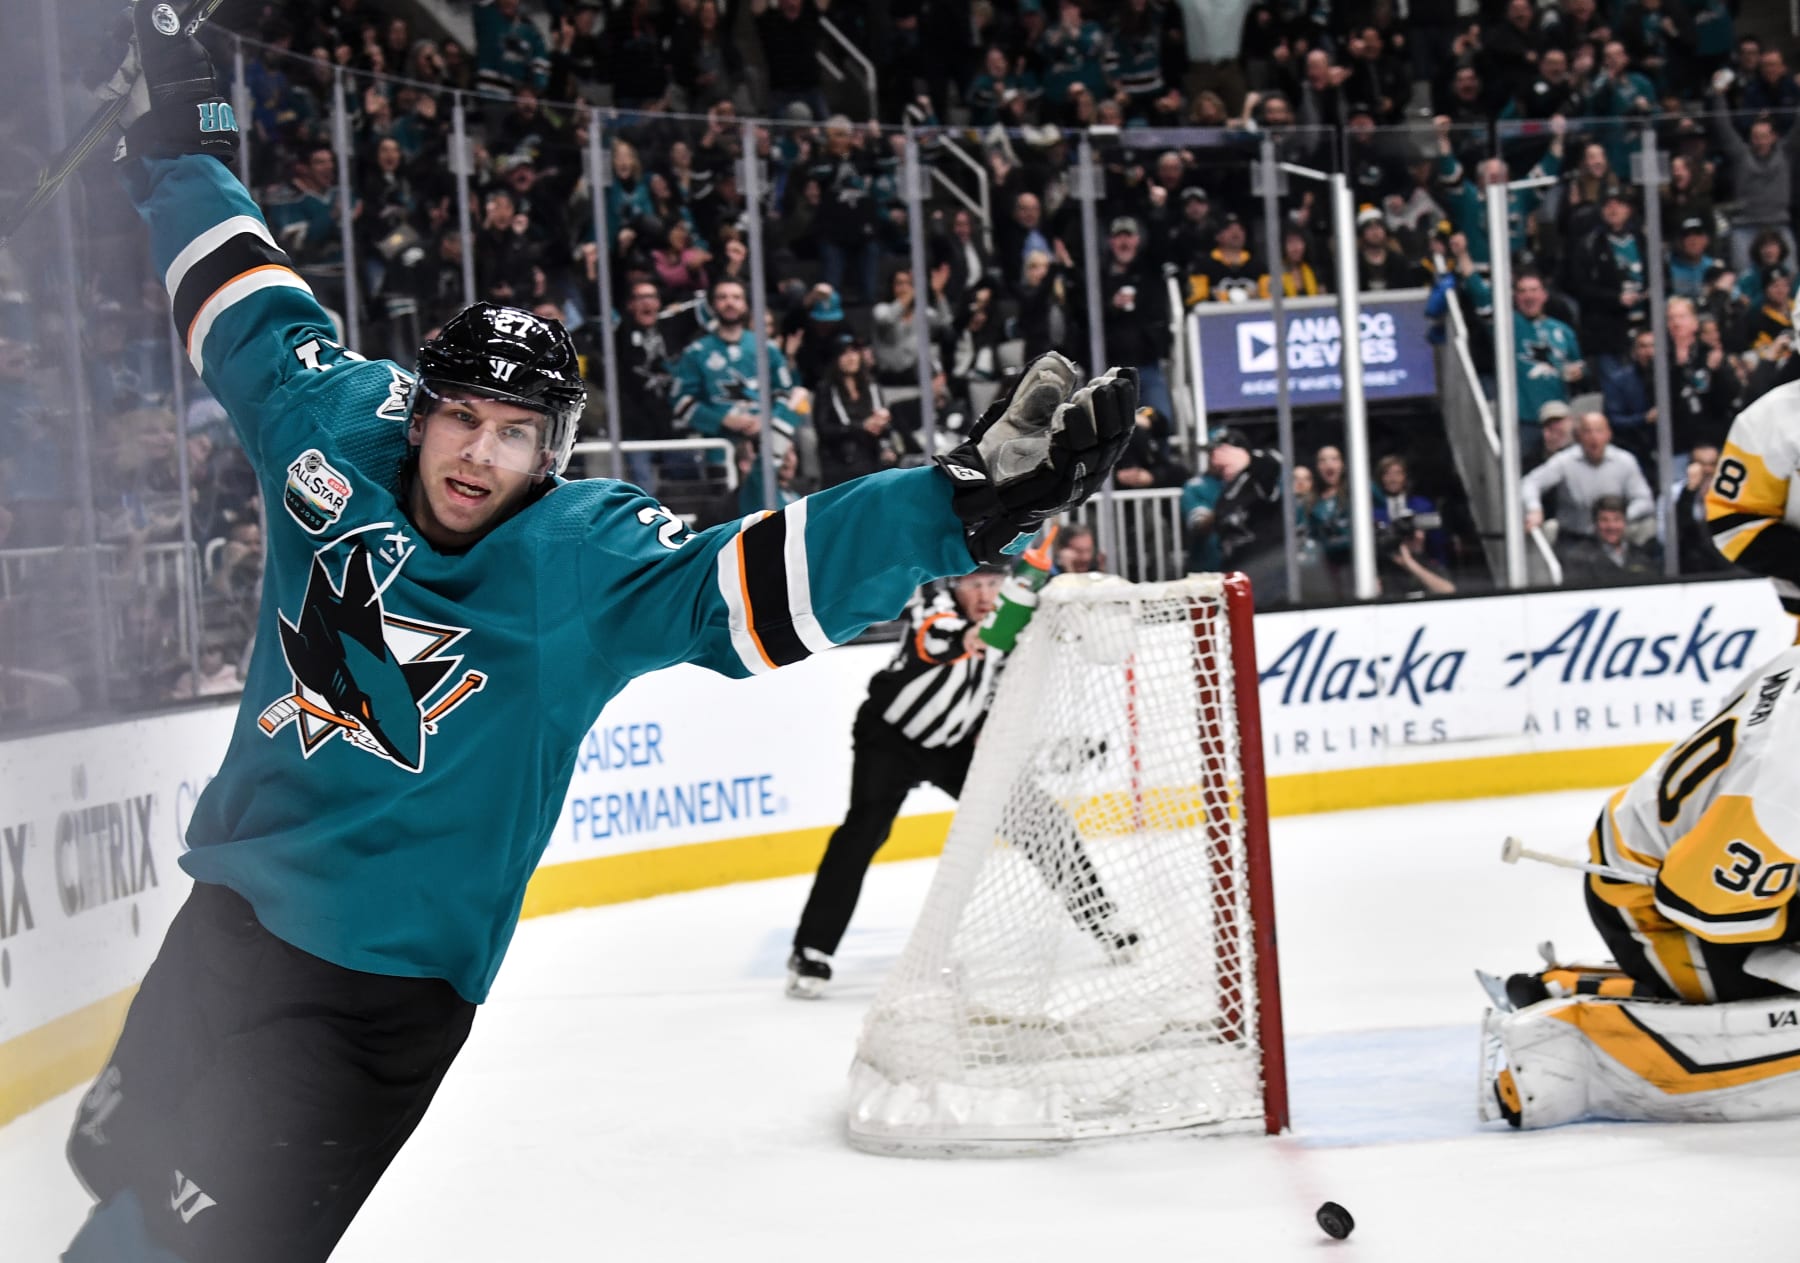 Joonas Donskoi Announces Retirement from NHL at 31 - The Hockey News